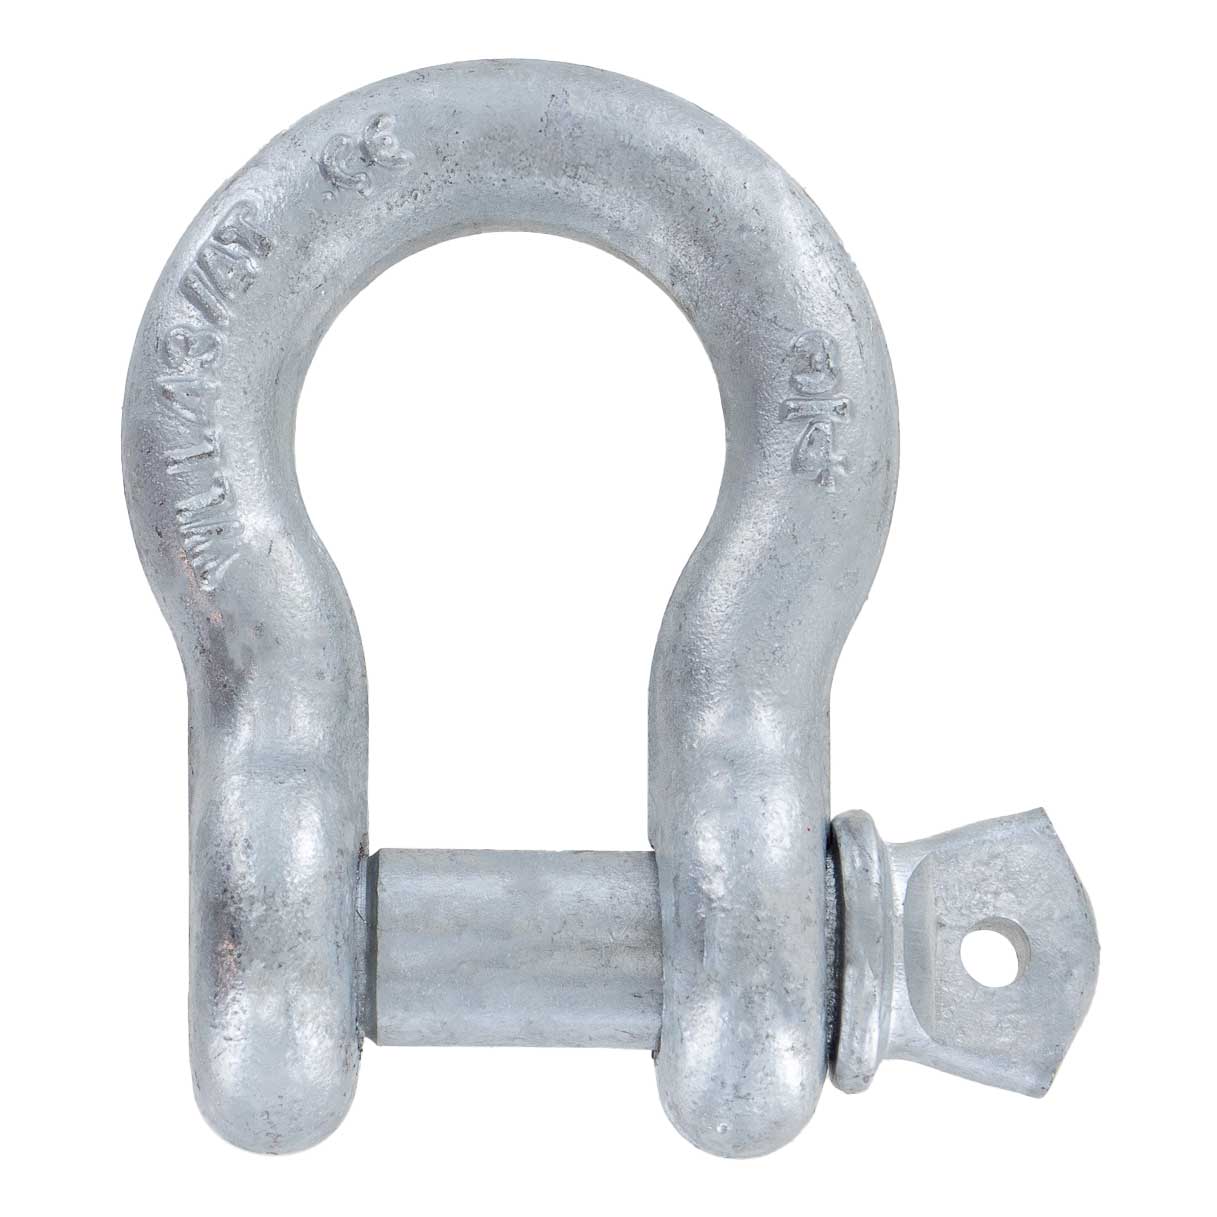 3/8" Galvanized Screw Pin Anchor Shackle - 1 Ton primary image